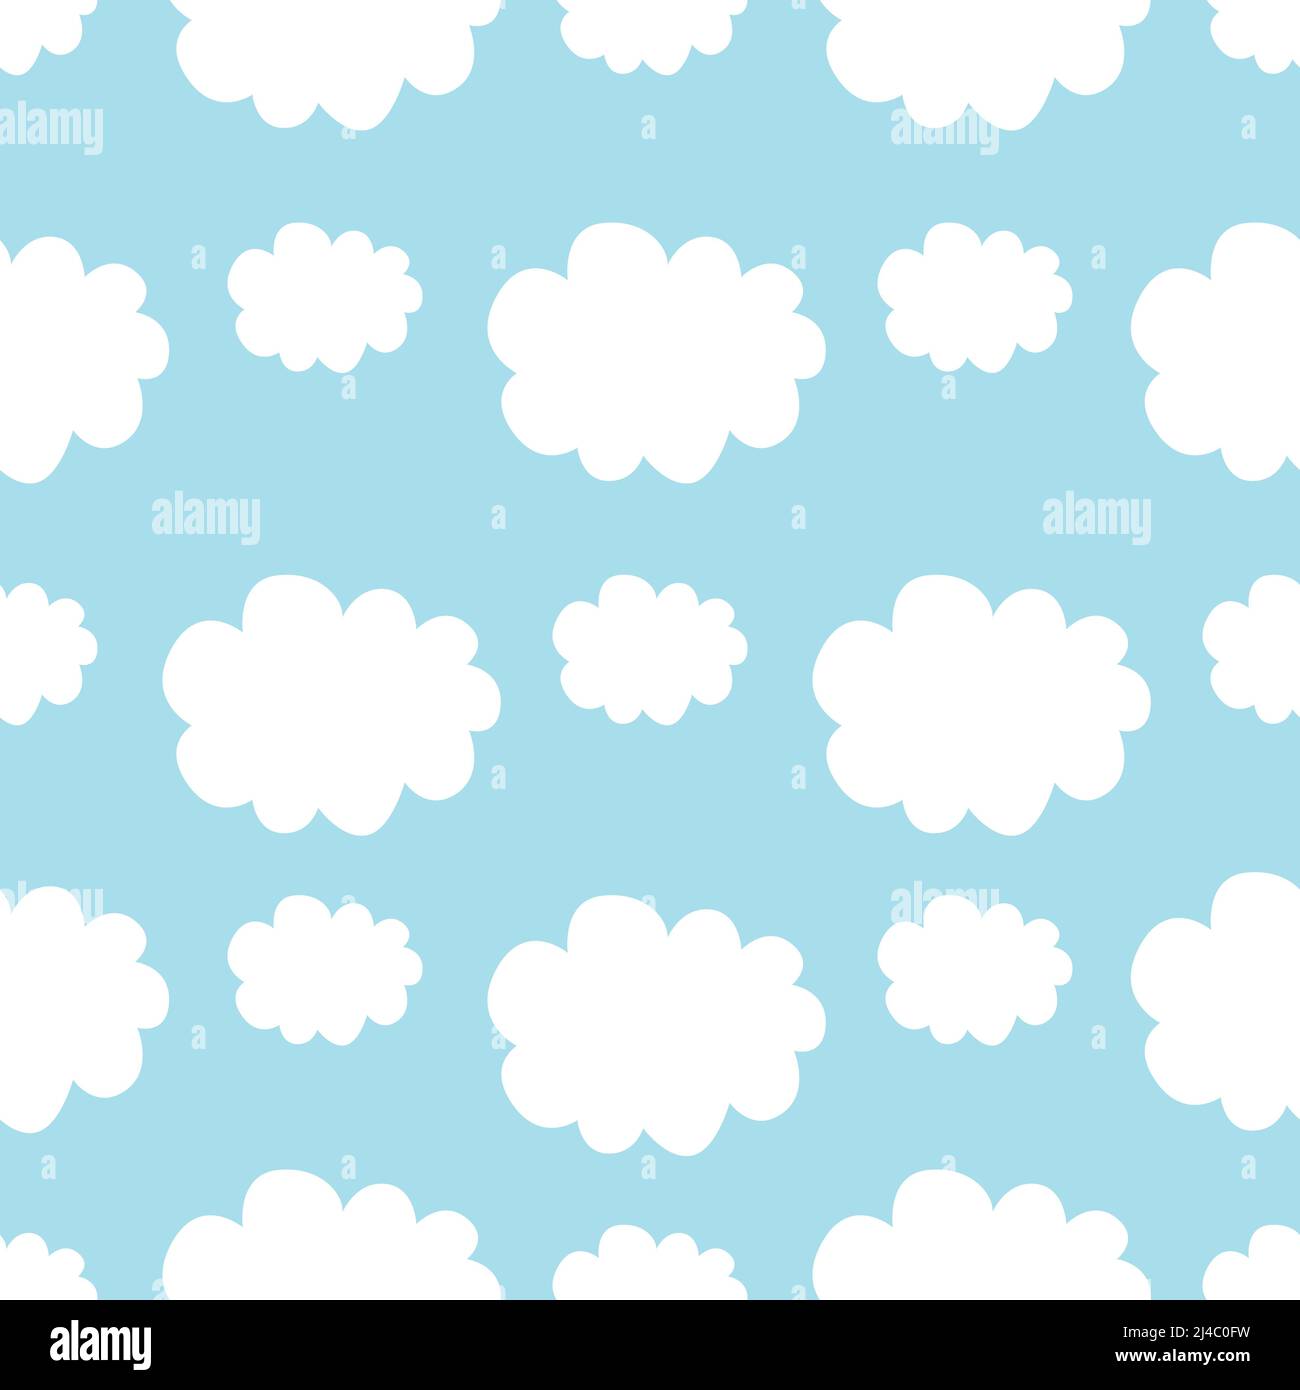 Hand Drawn Abstract Clouds isolated on a blue background. Simple bubble clouds is in Seamless pattern. Stock Vector